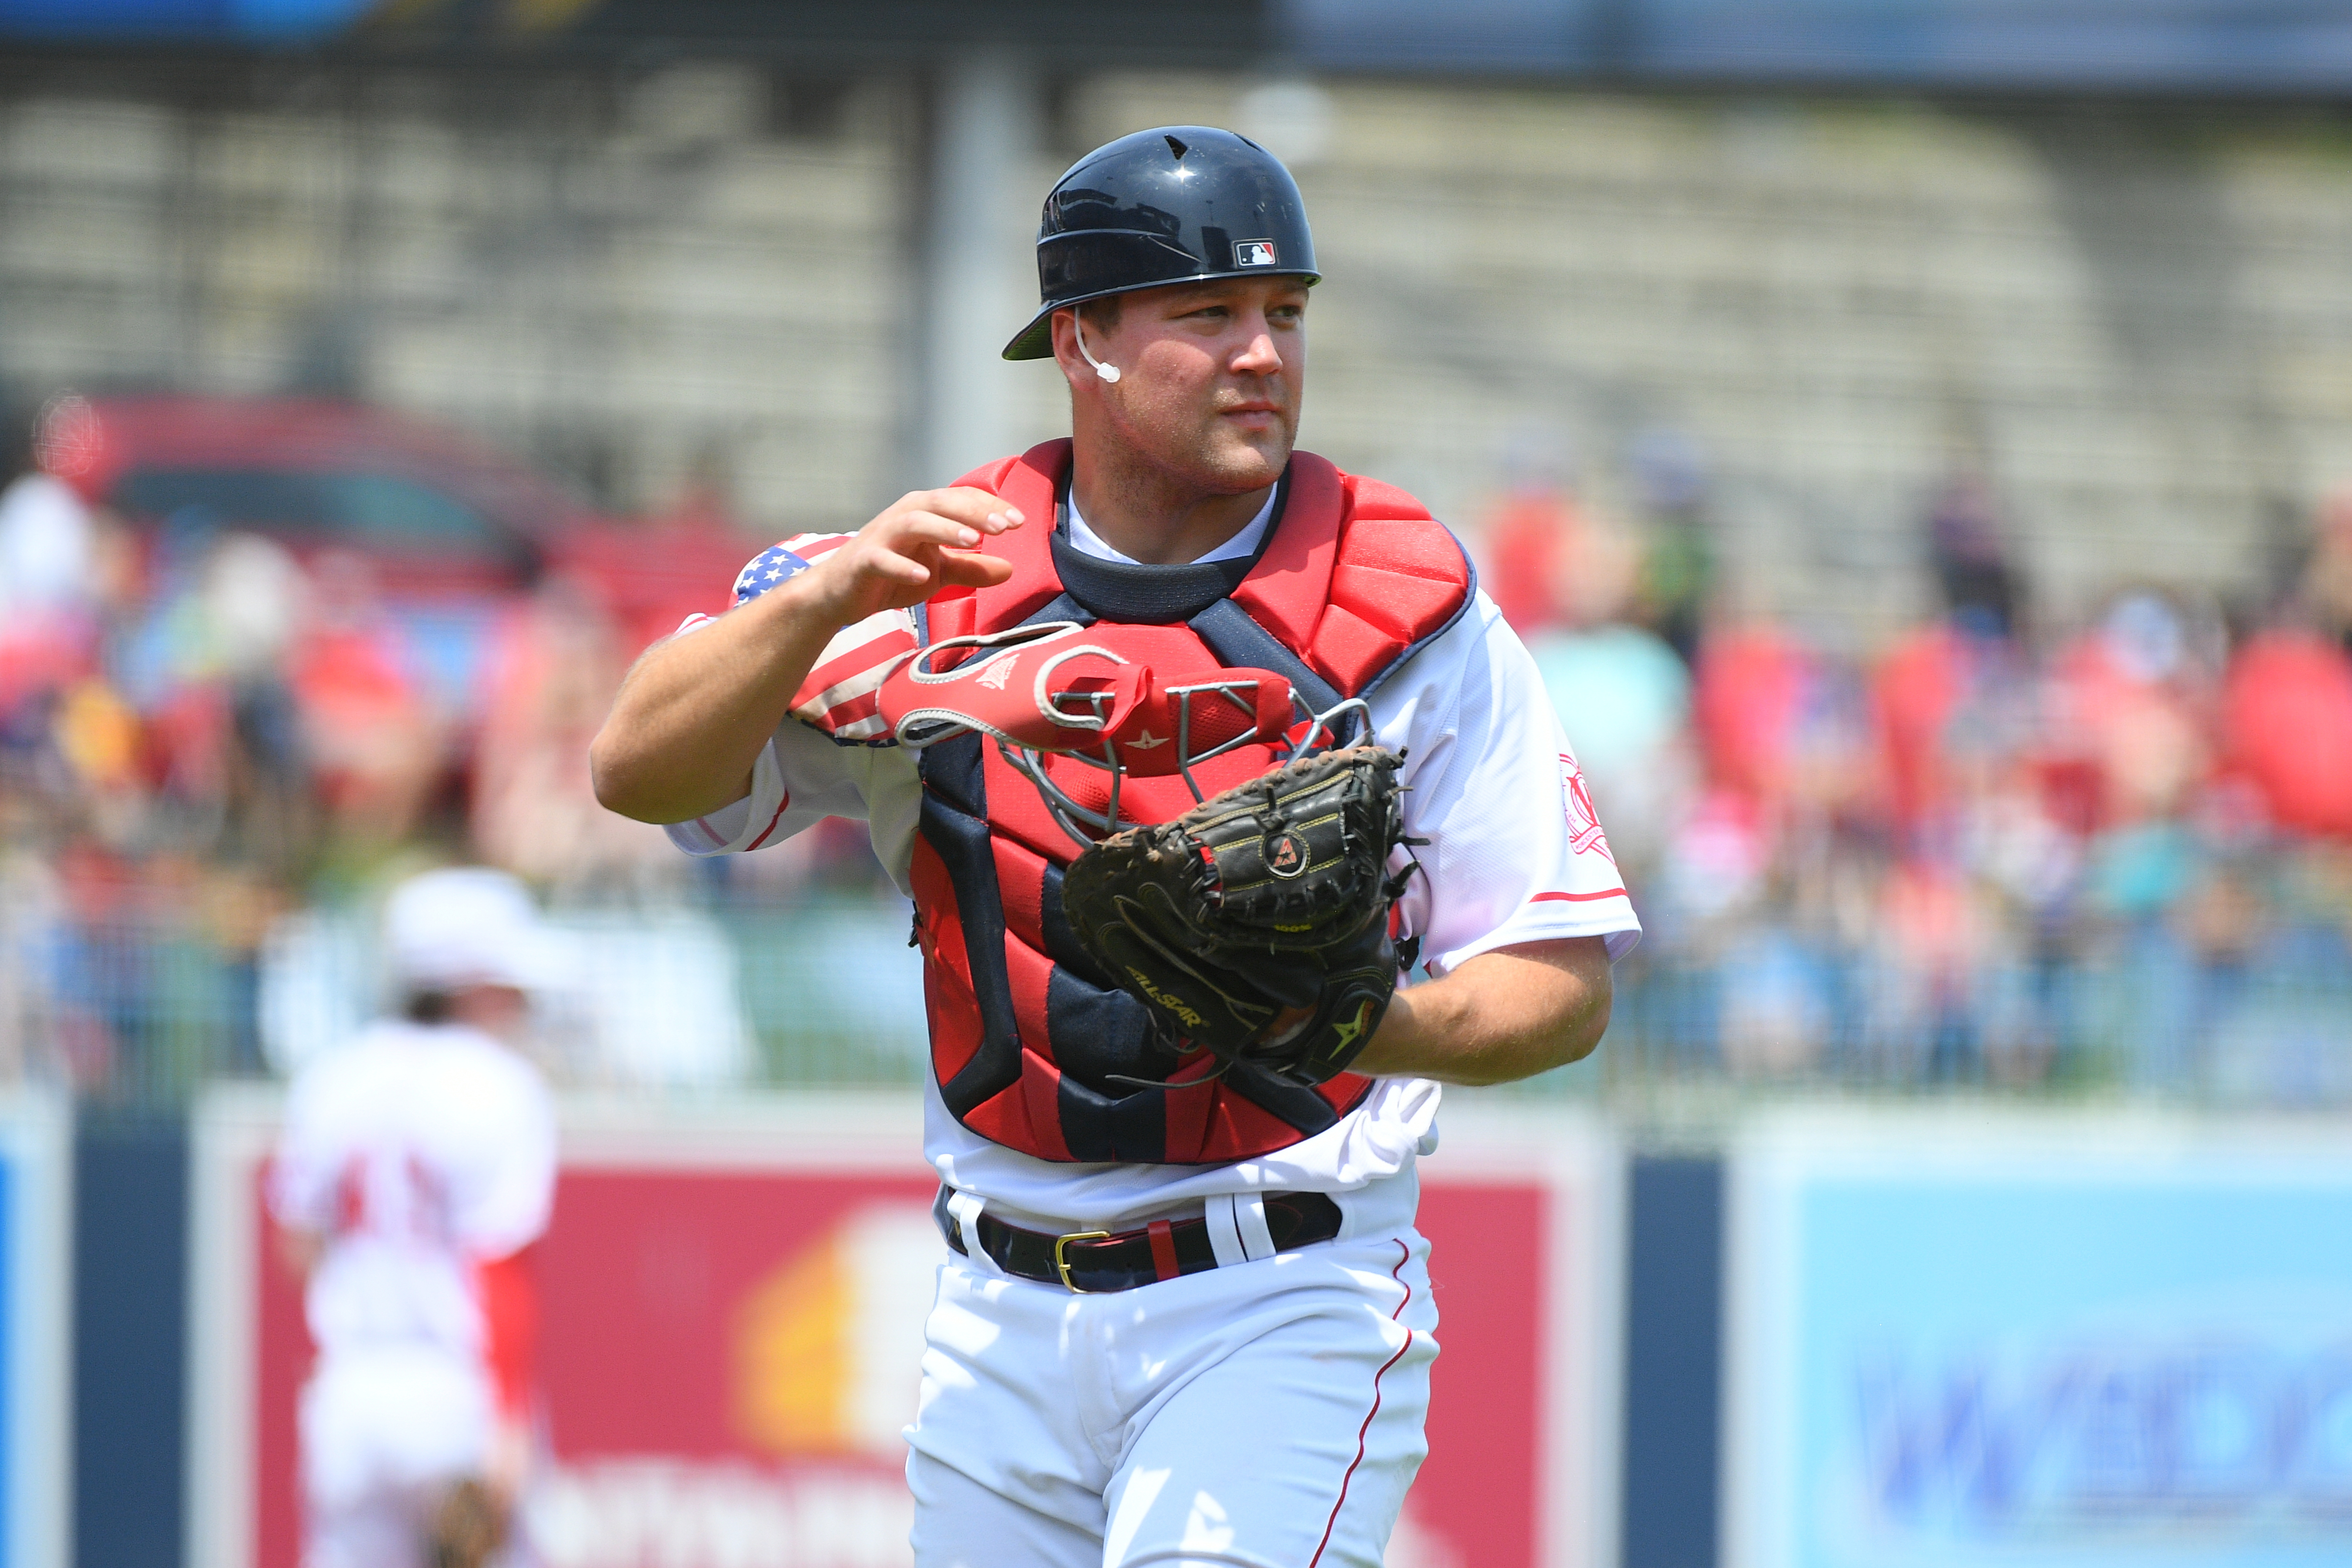 MiLB: JUN 11 International League - Rochester Red Wings at Worcester Red Sox